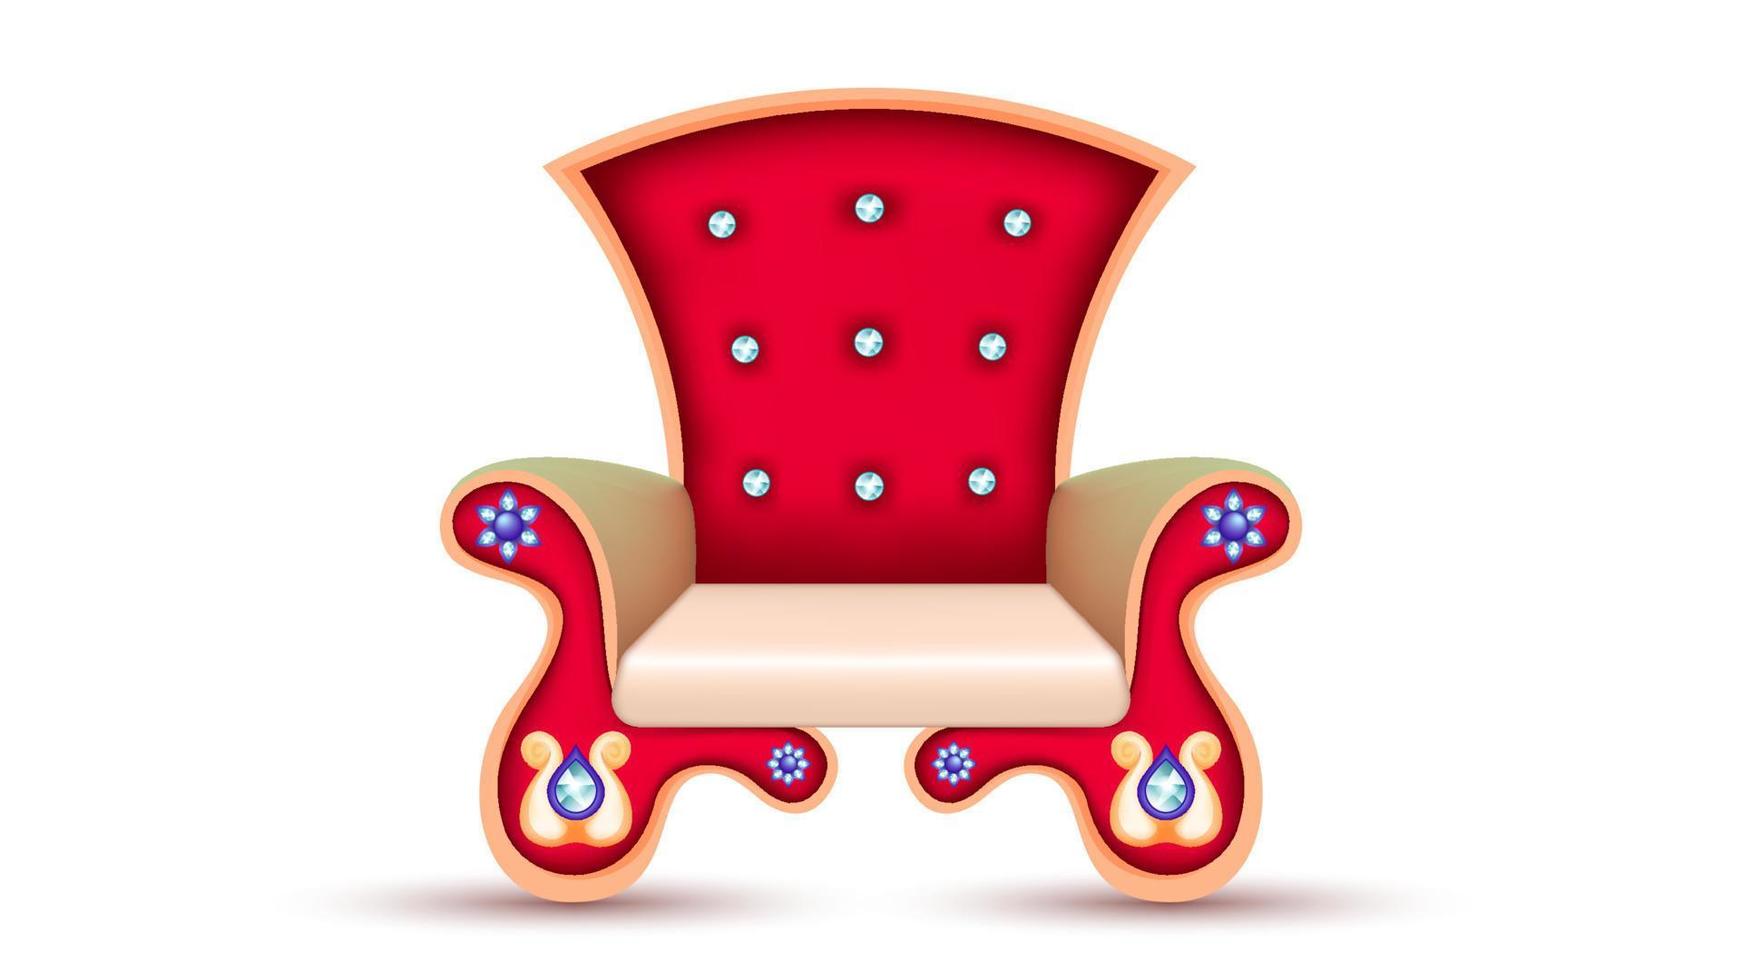 Royal Armchair Vector. decorative stage chair vector for Indian wedding designs.